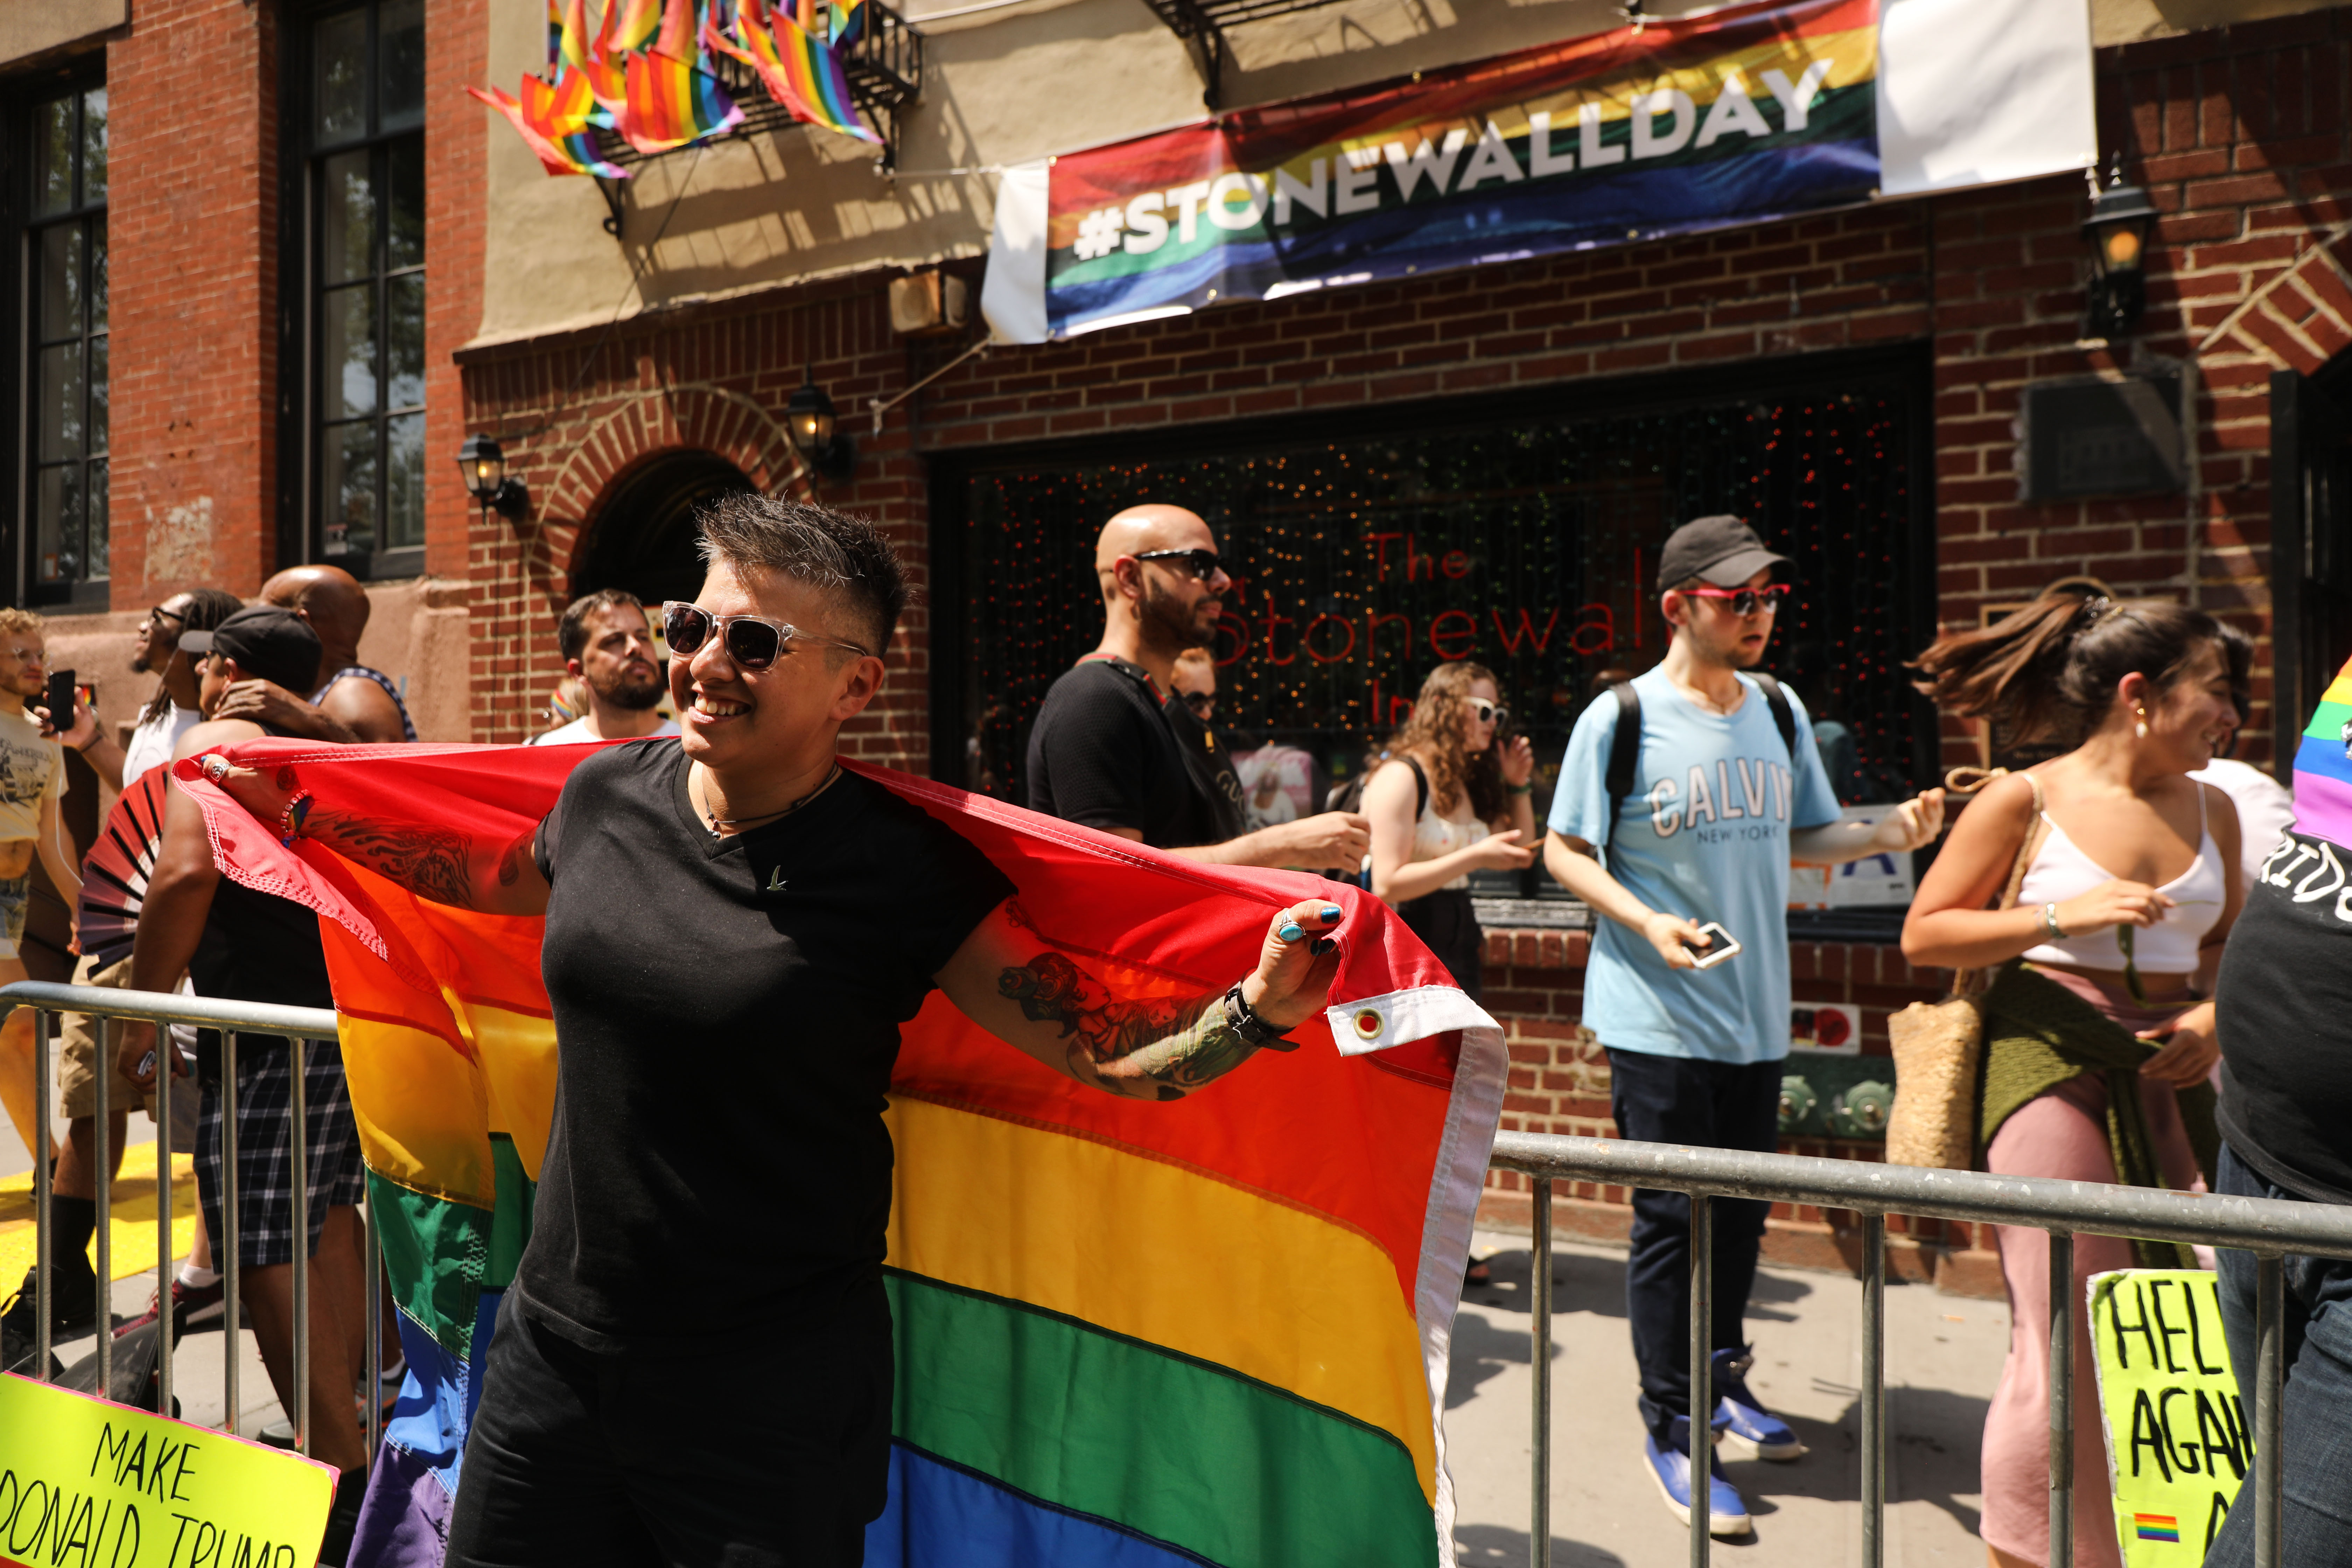 Activists and politicians spoke at the rally held outside the Stonewall Inn.